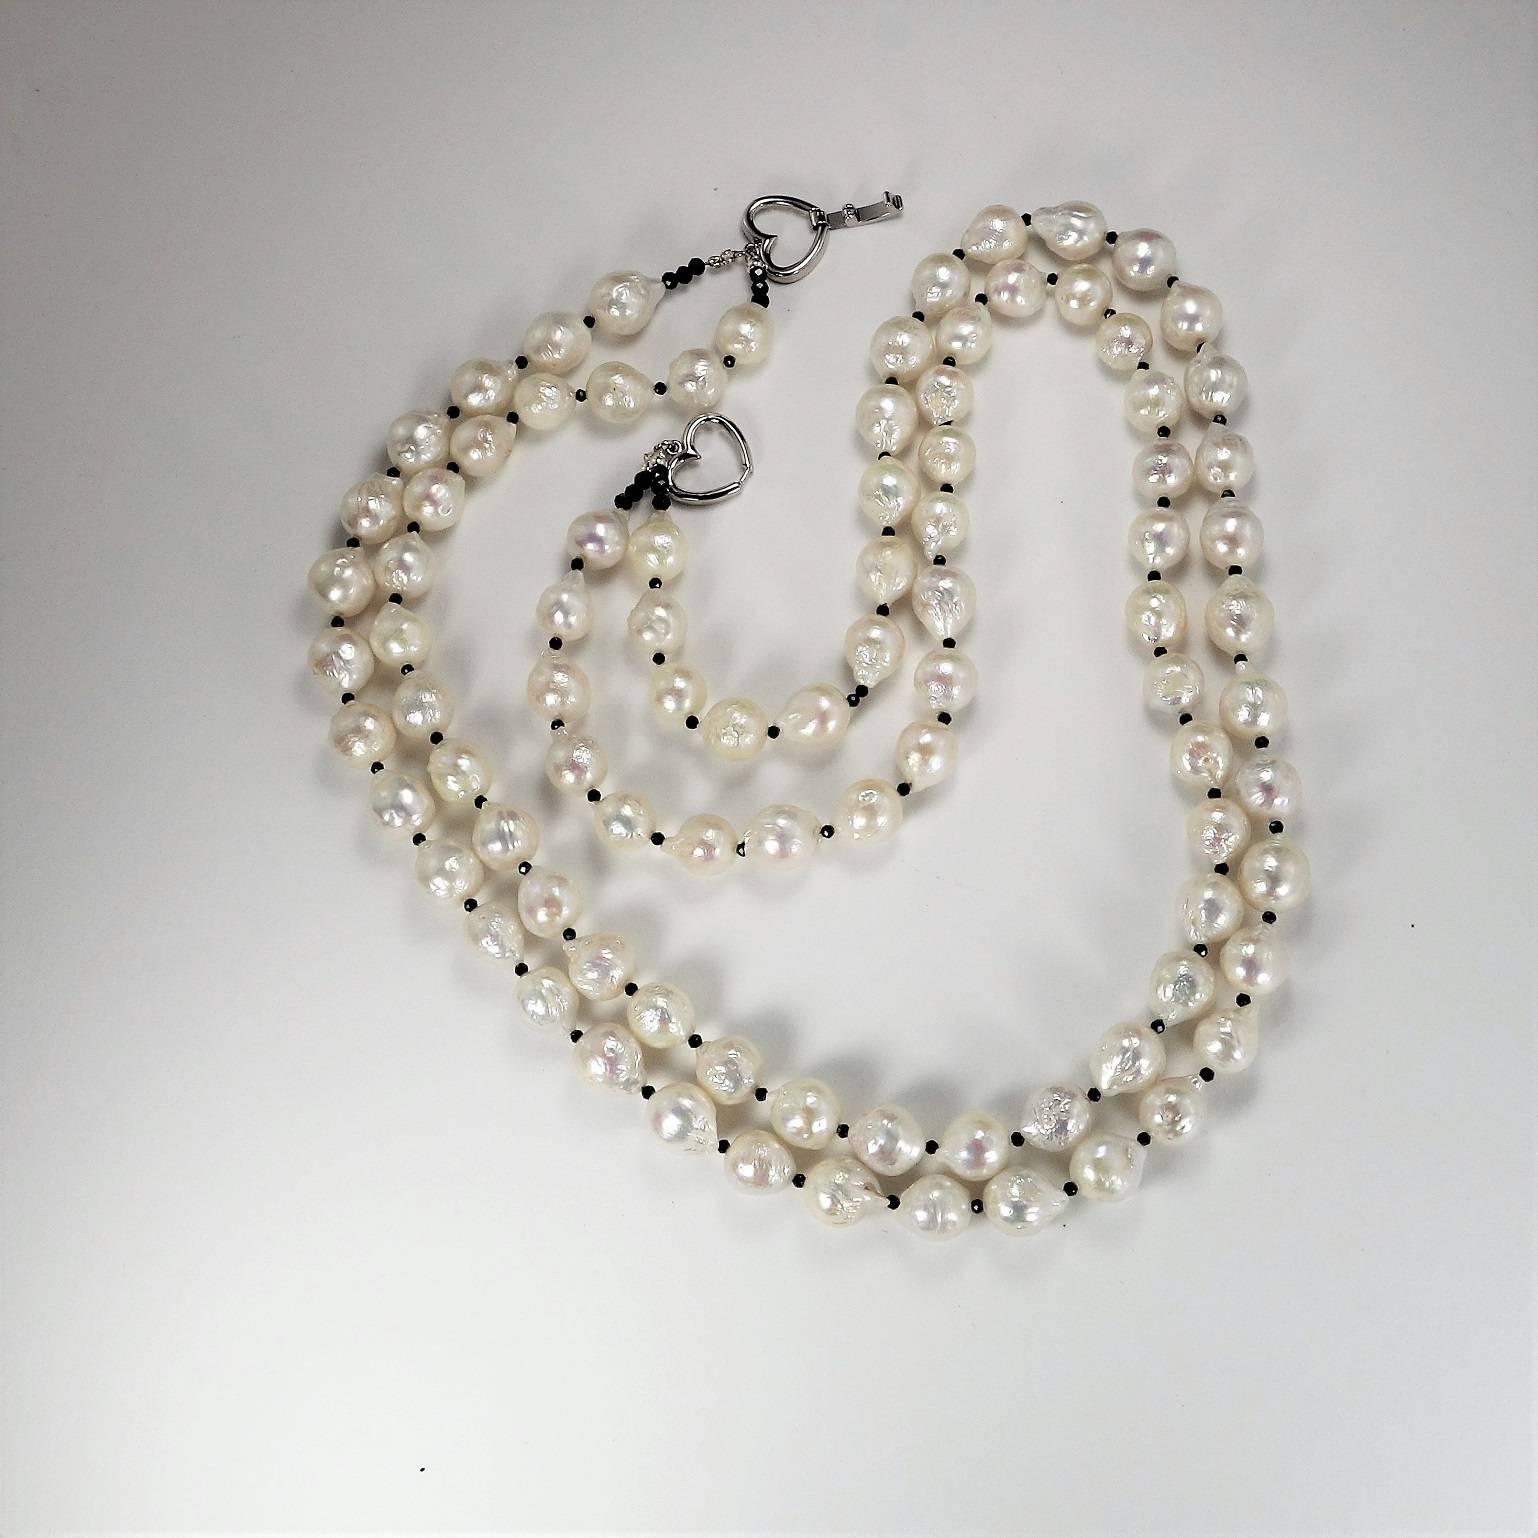 
This lovely 25 inch necklace of Two strands of White Fireball Pearls is a delight to wear. The pearls stand out with tiny black faceted spinel beads between them. It's an updated classic look. Pearls are always in style and this necklace will